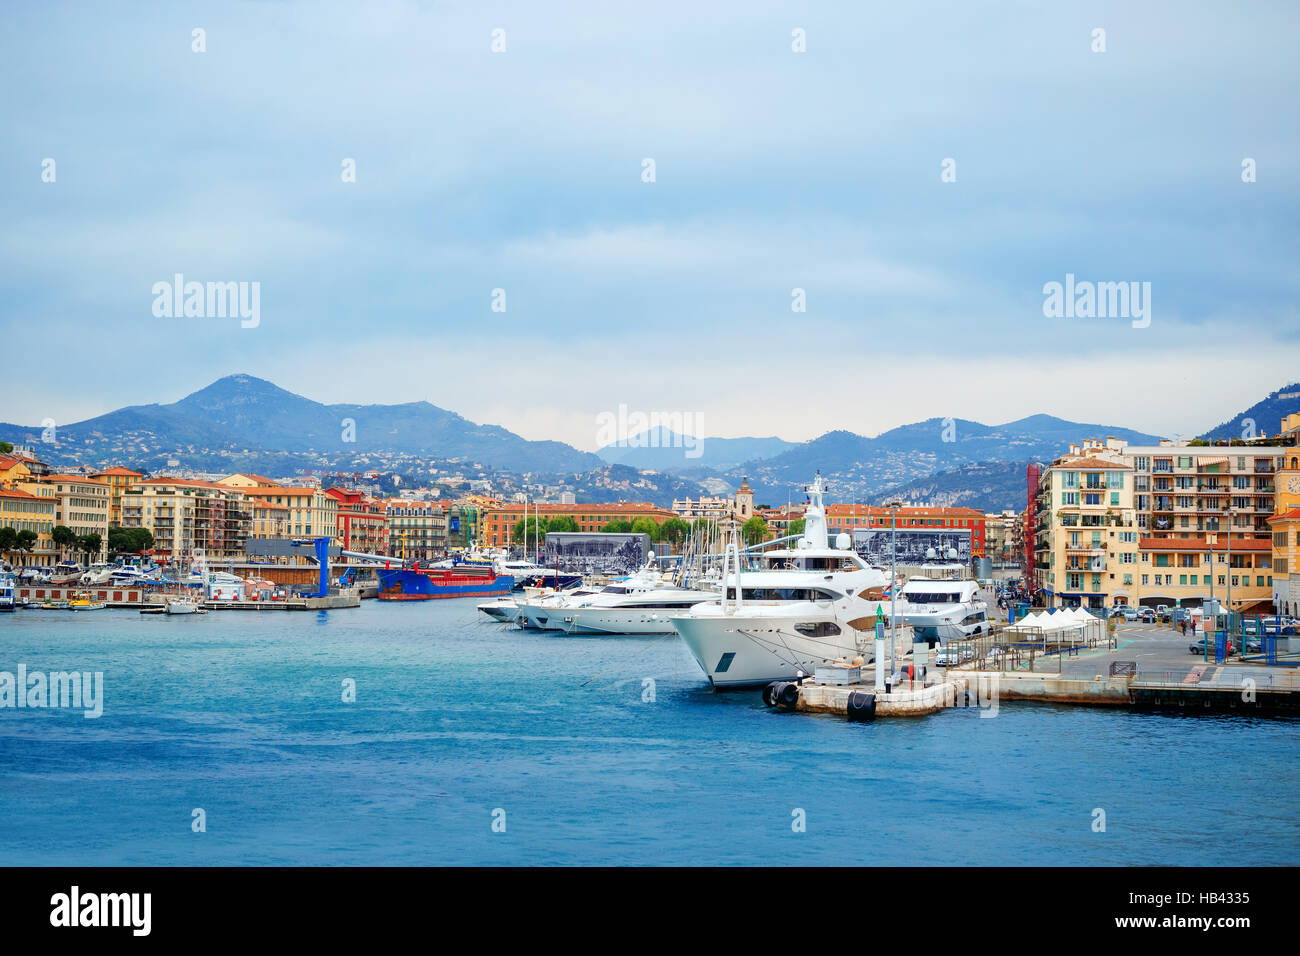 Boats and yachts moored in the port of Nice Stock Photo